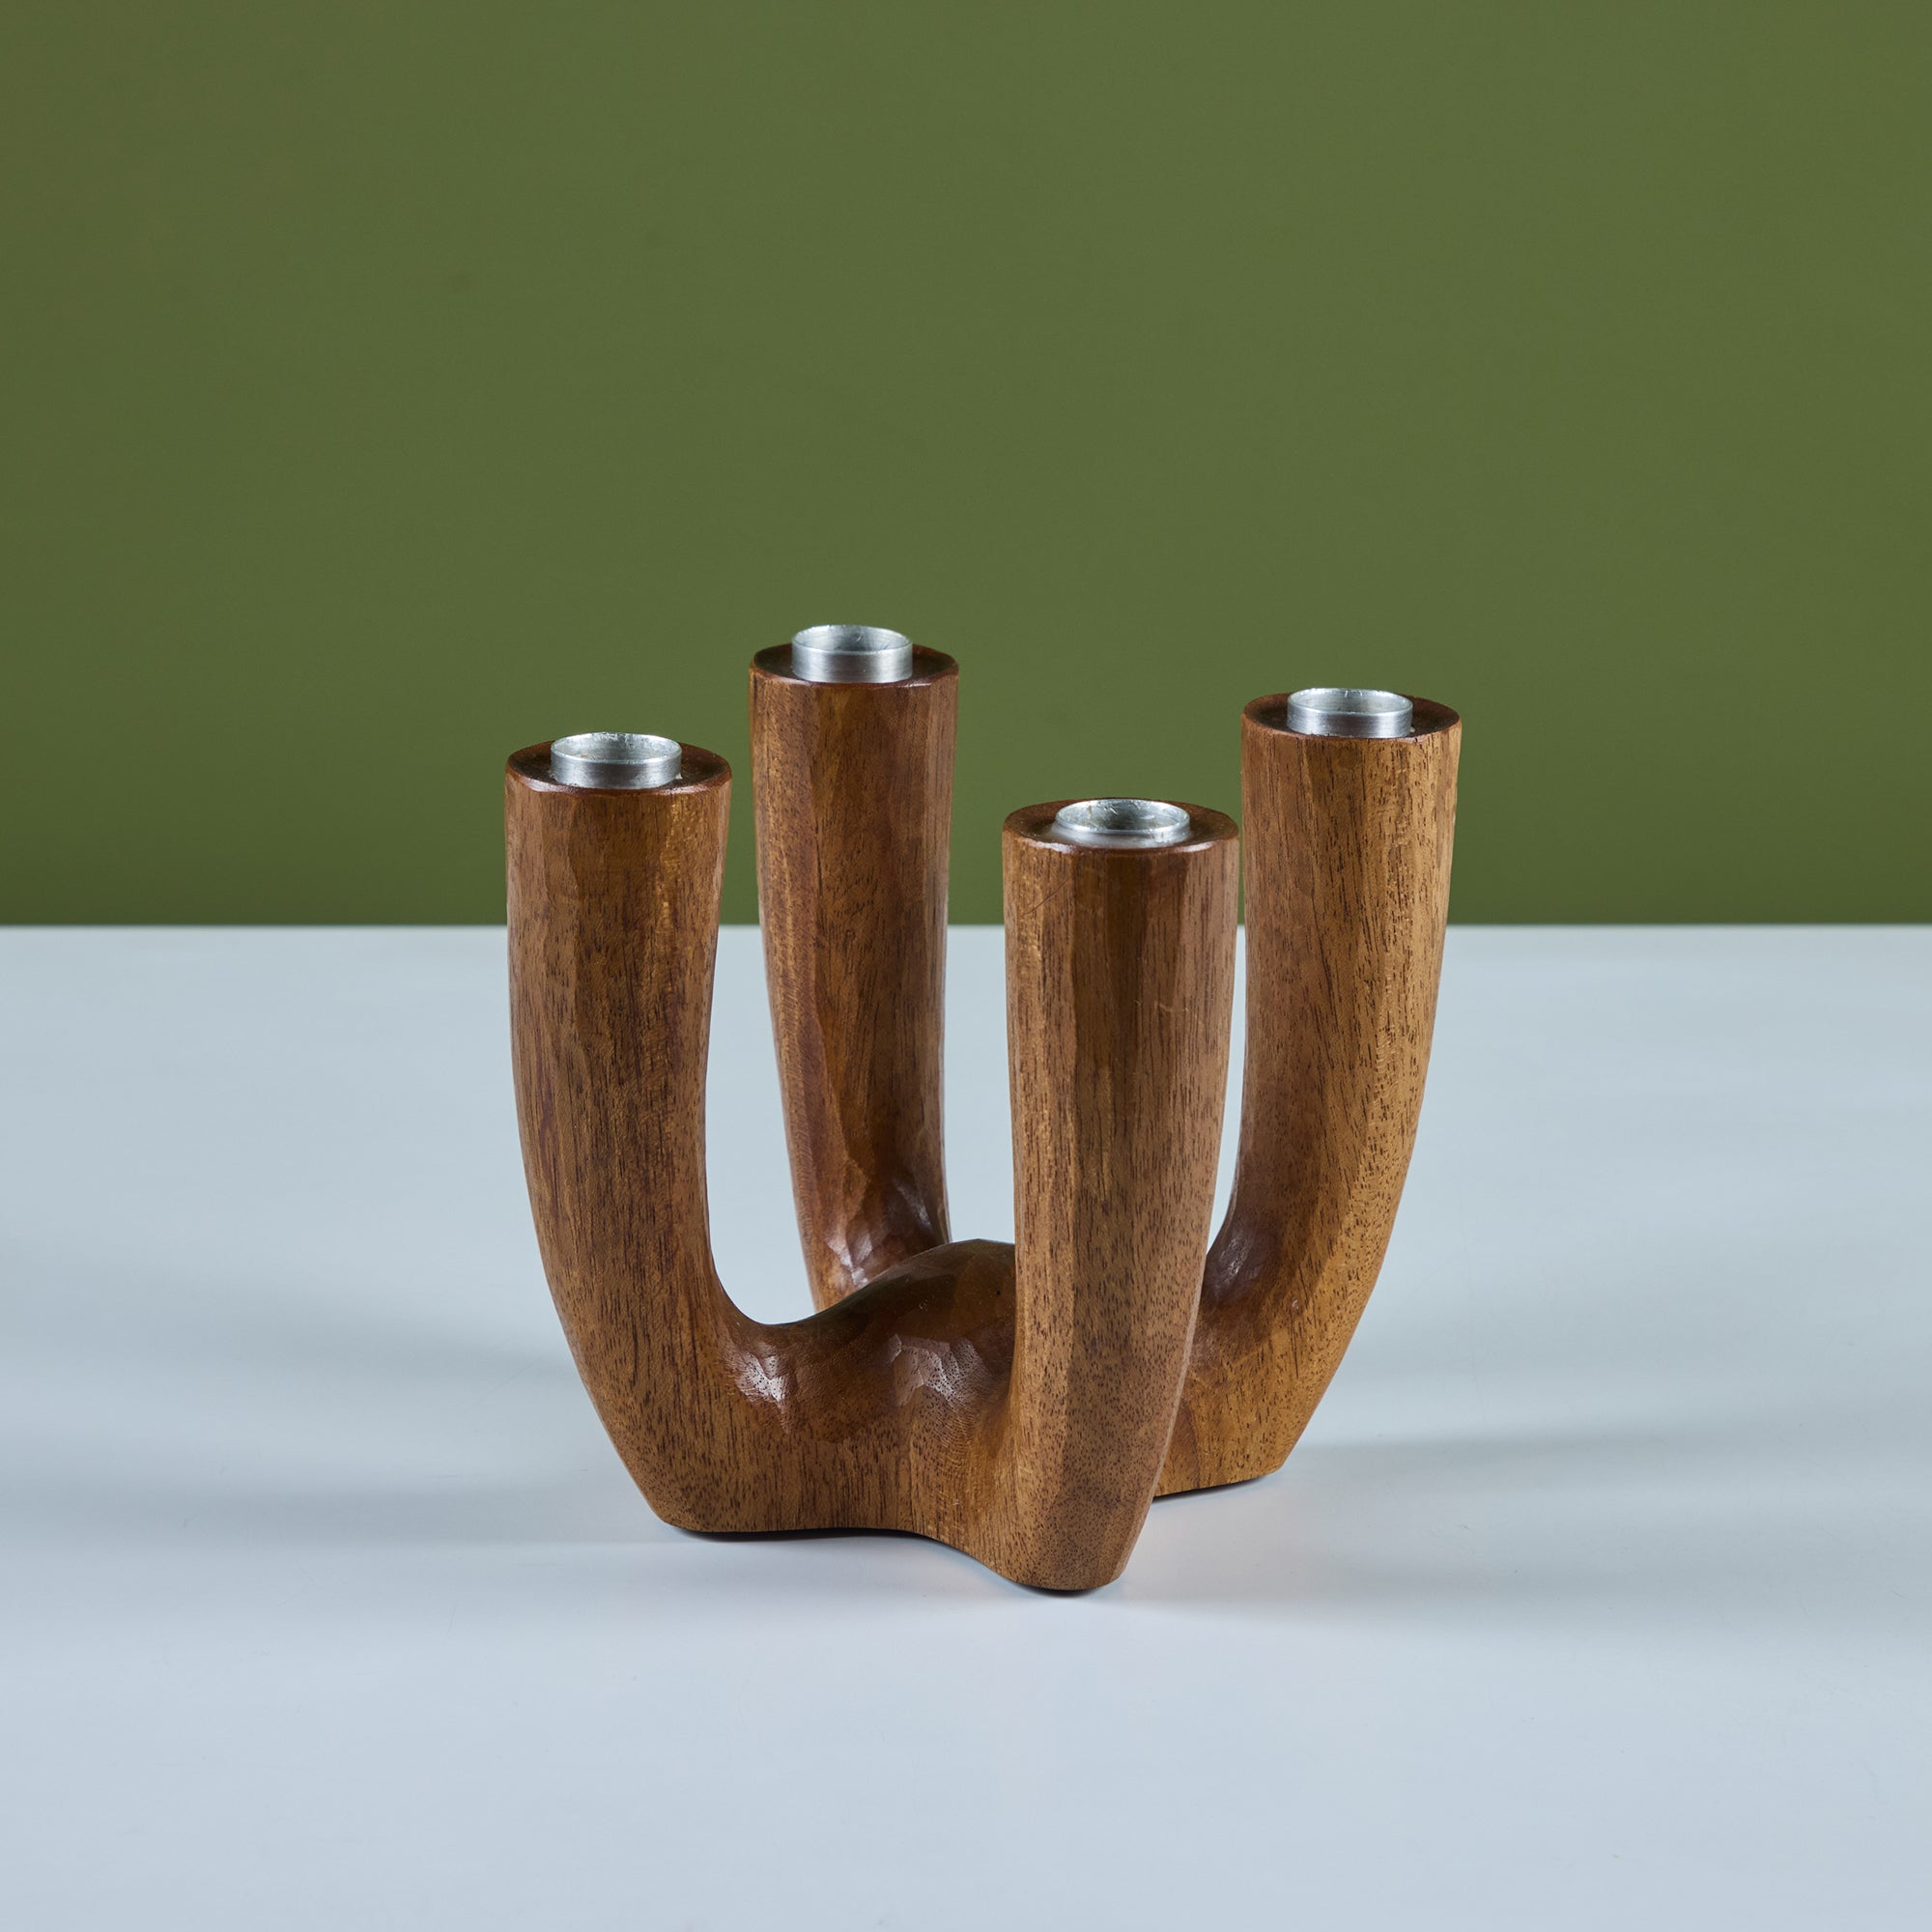 Four Arm Sculpted Wood Candle Holder by Laur Jensen for Odense